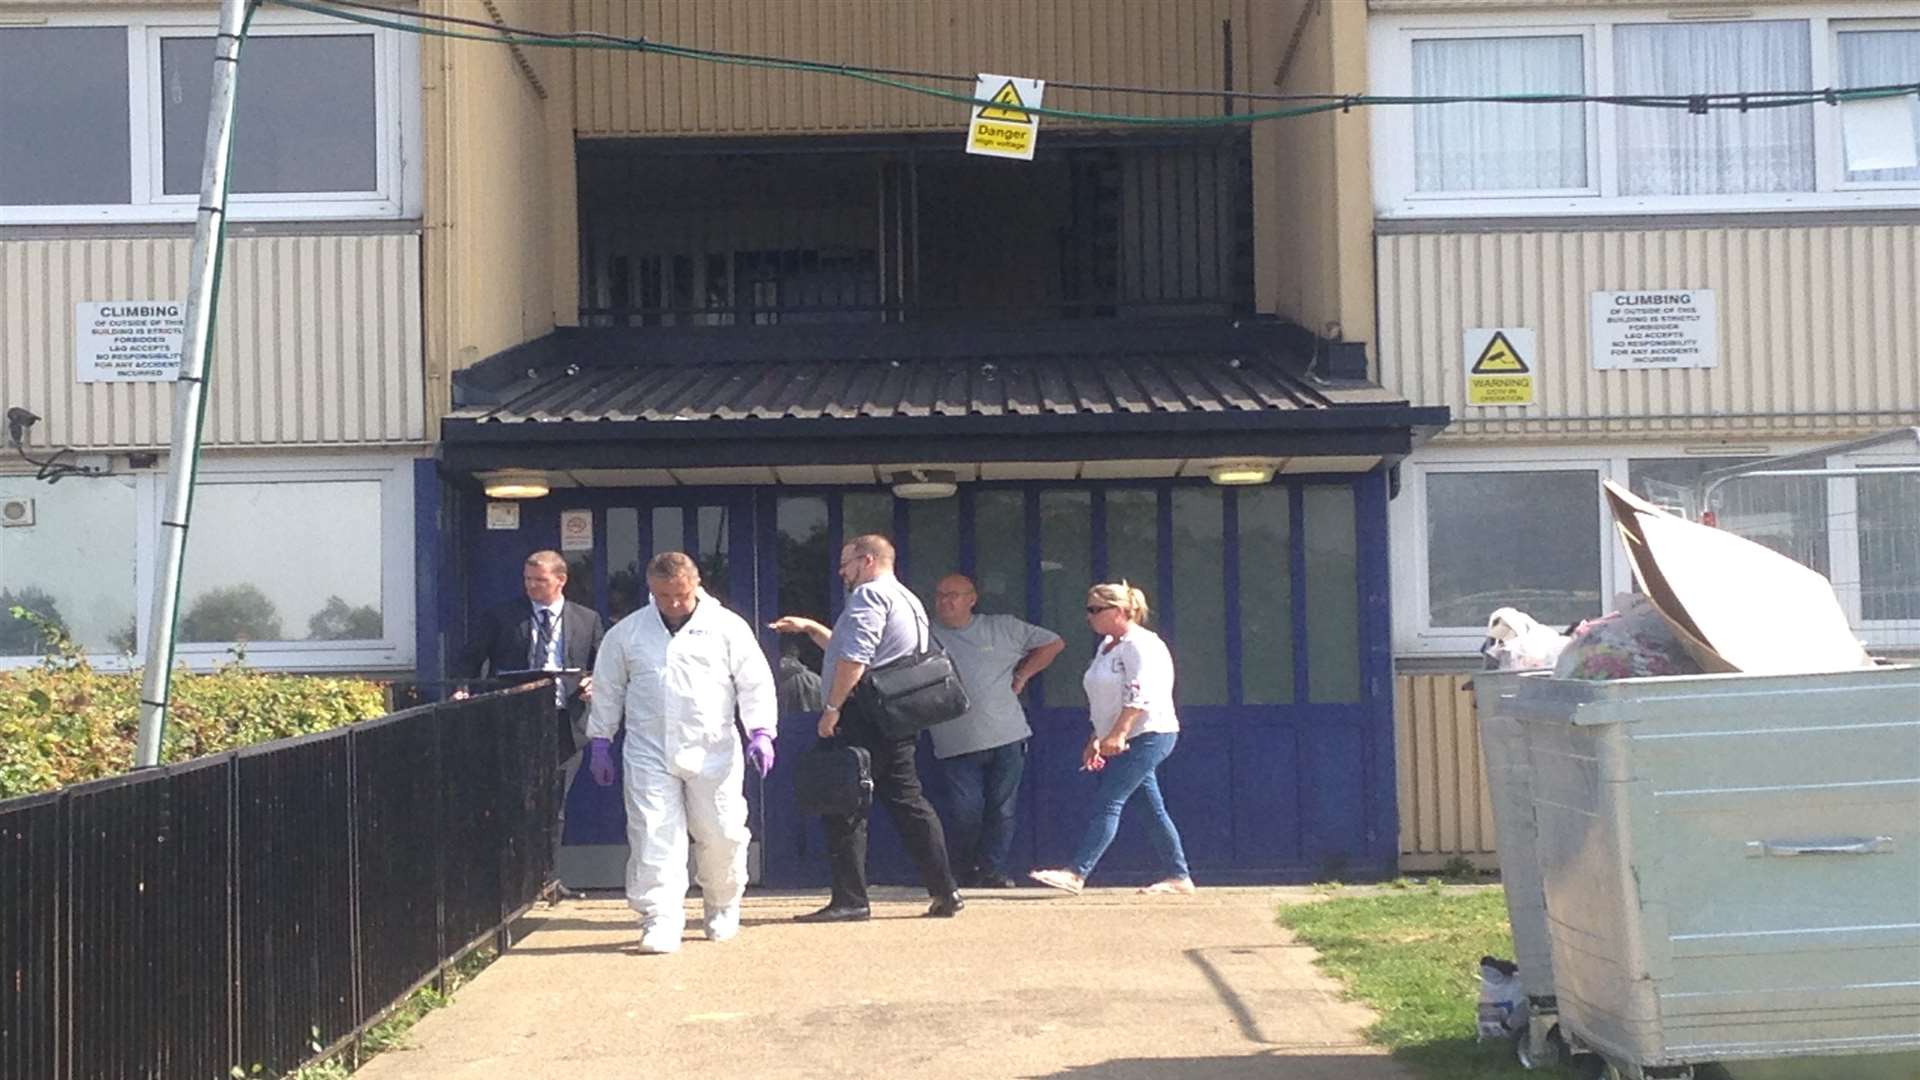 Forensic officers were called into investigate after the death